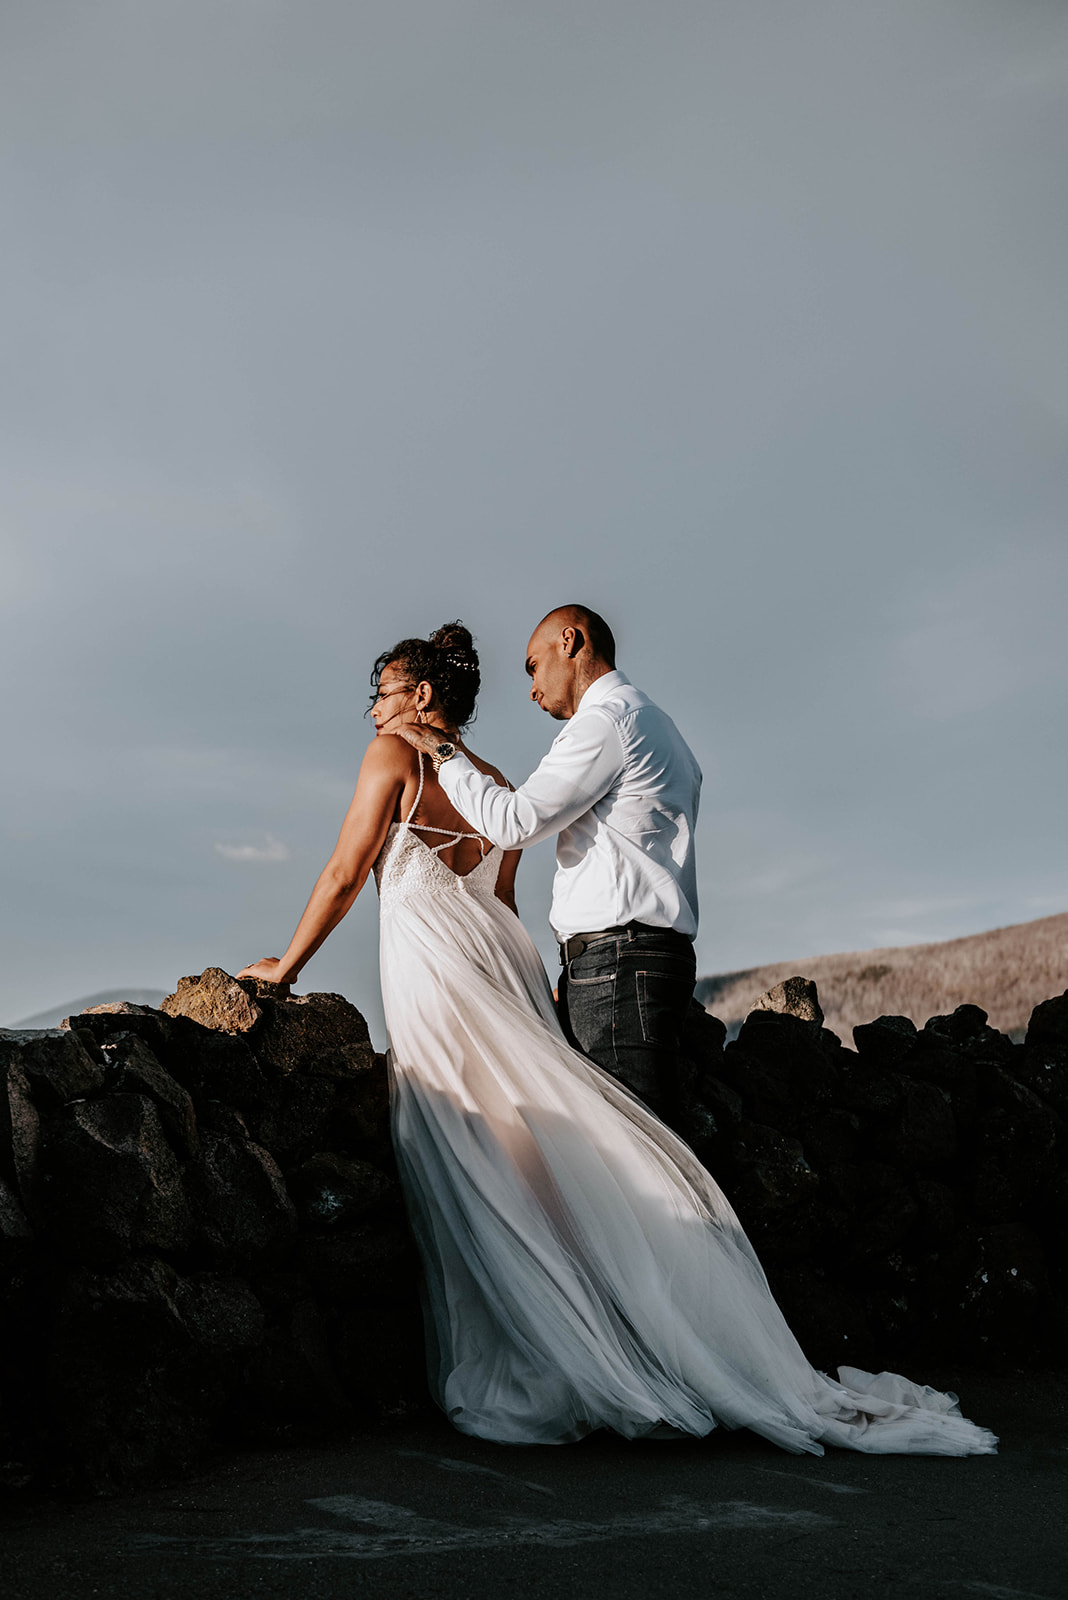 A bride and groom on top of the Oregon lava rock castle - Dee Wright Observatory